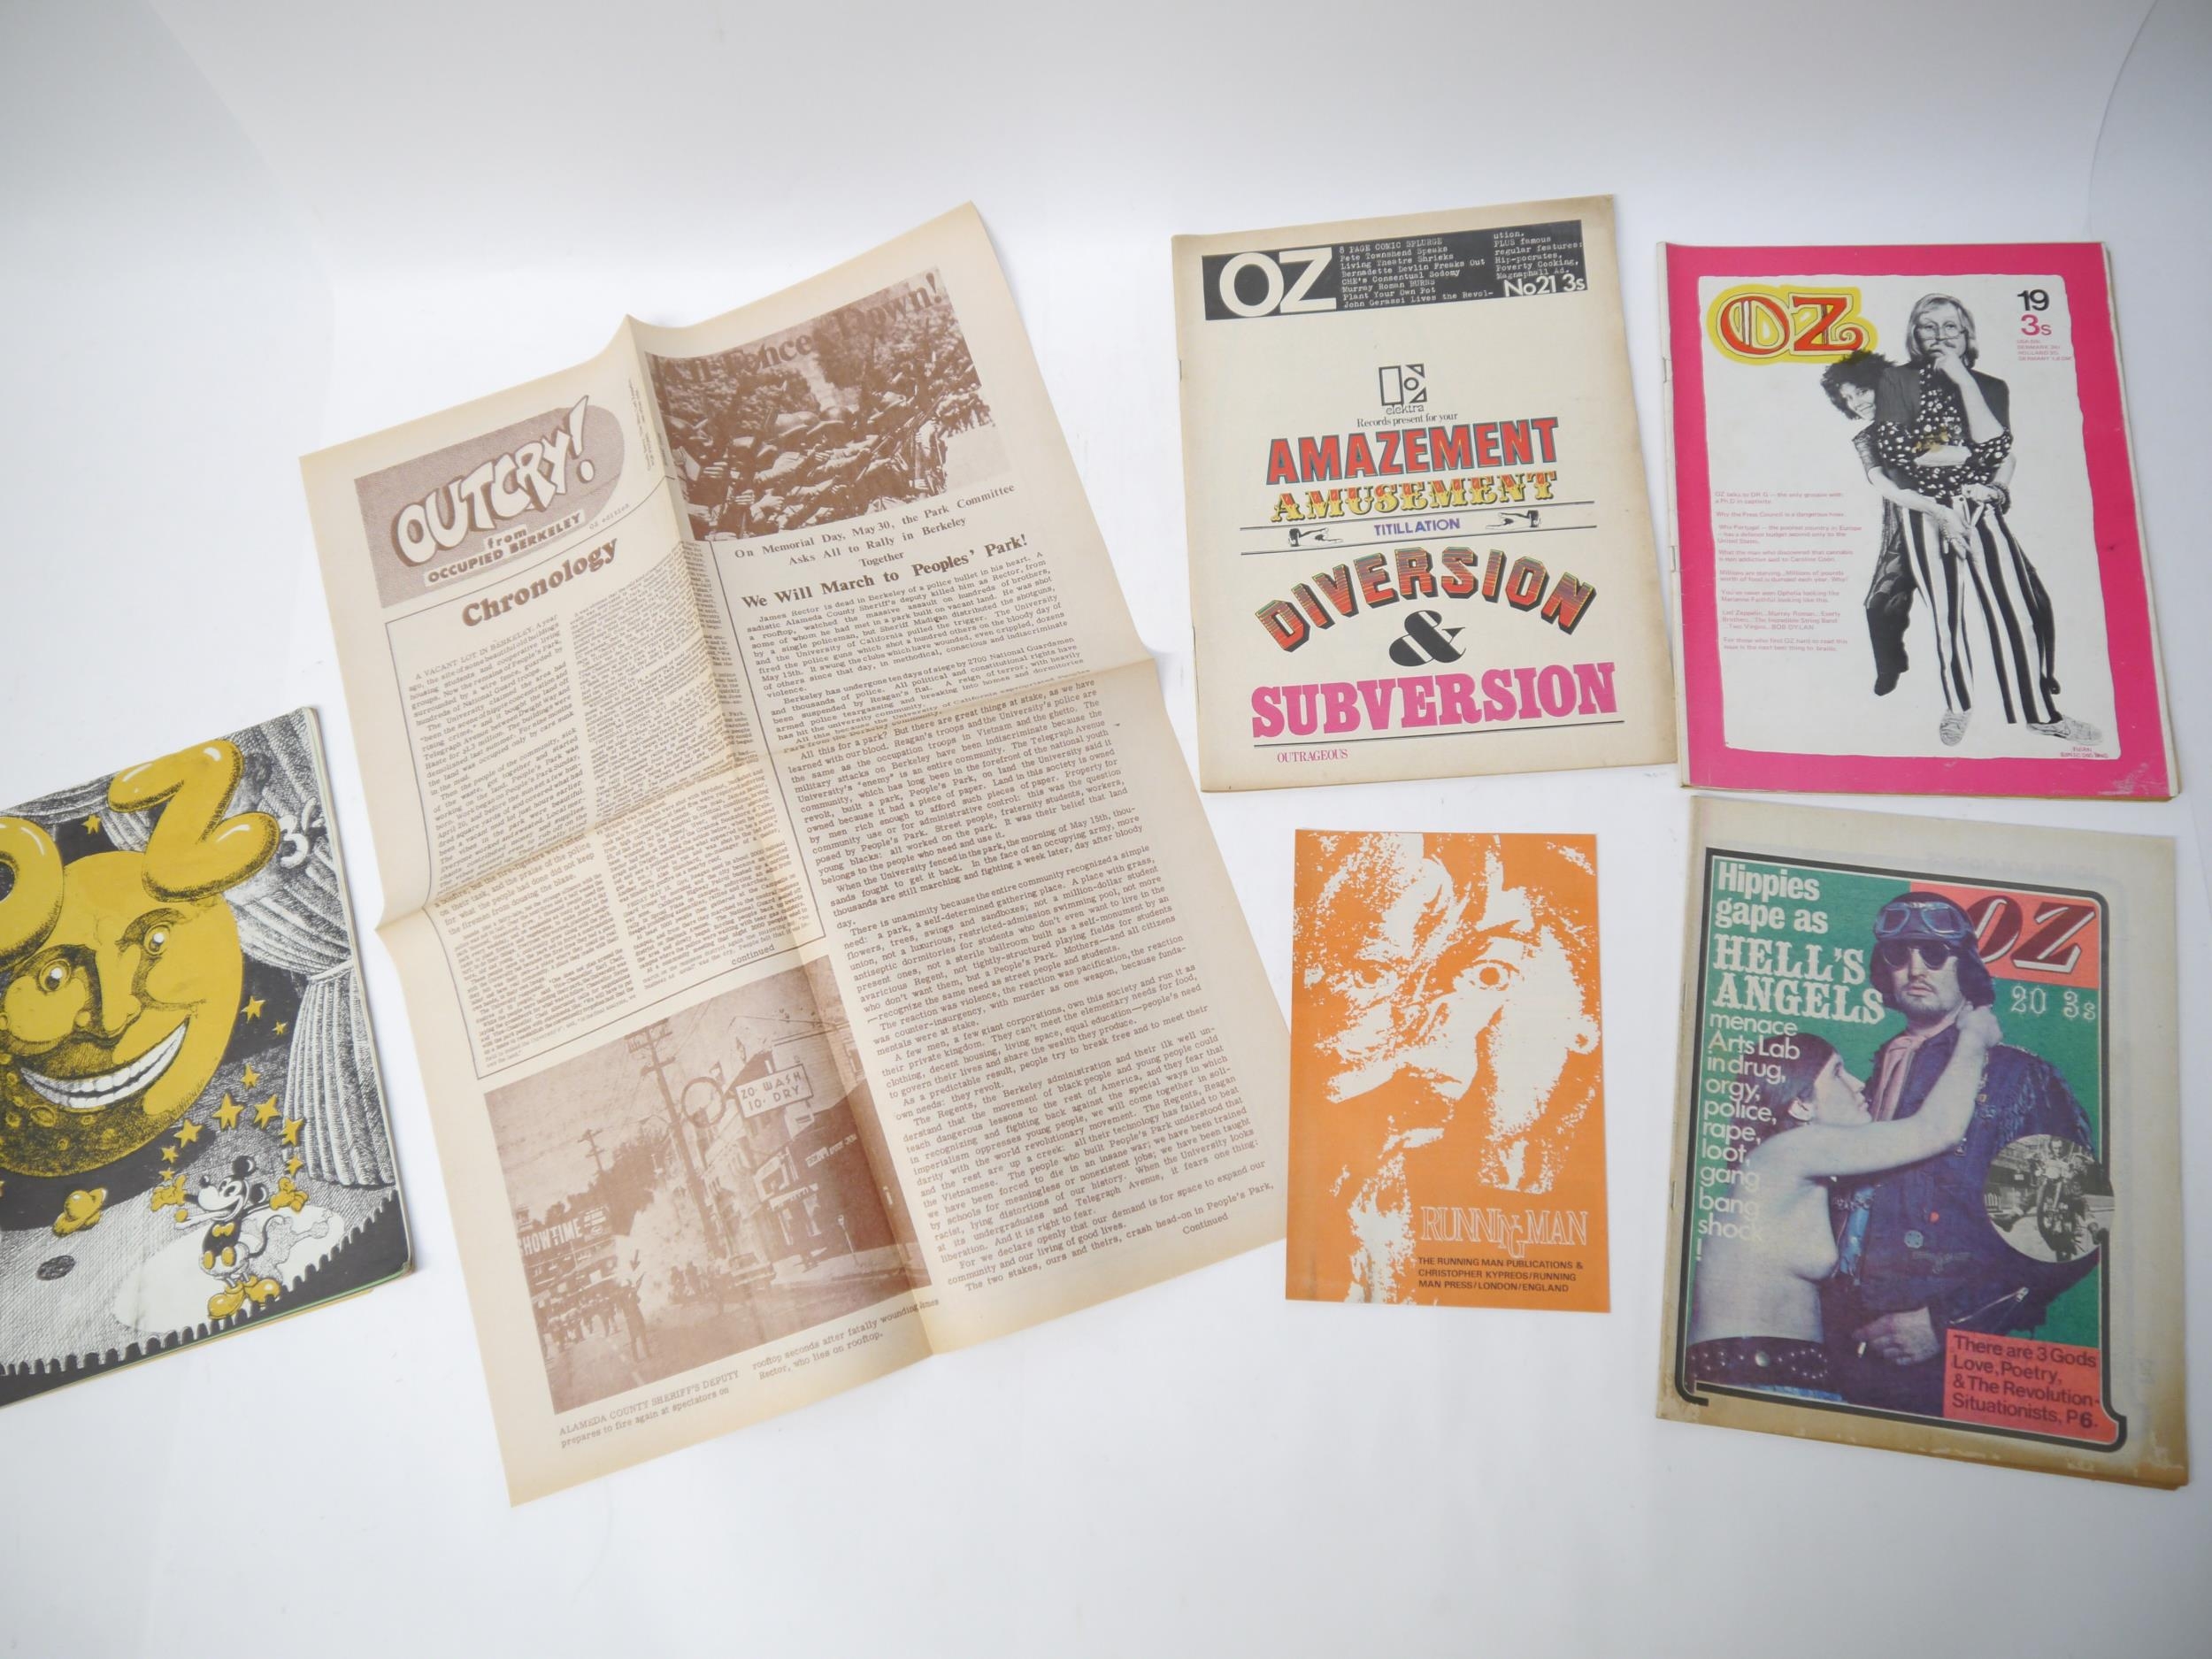 (Counter Culture.) 'Oz Magazine', London, OZ Publications Ink, 33 issues May 1967 to November - Image 5 of 19